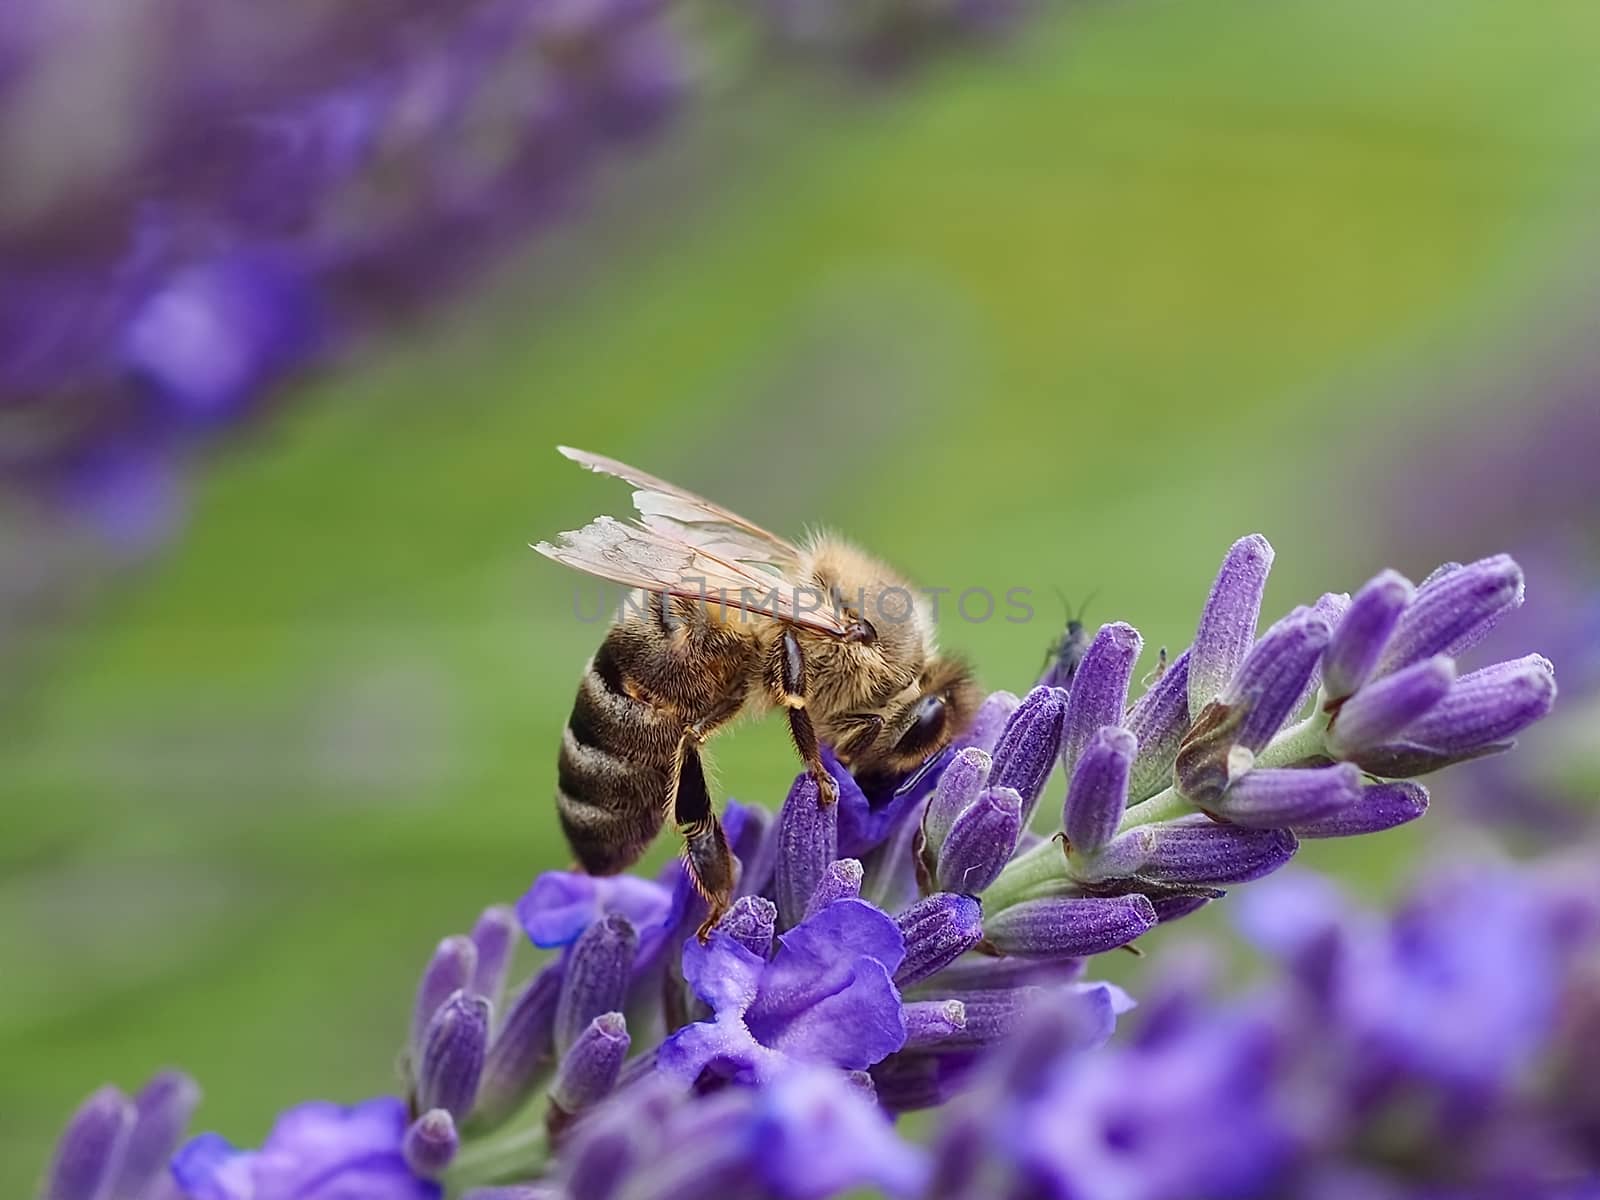 Macro of a honey bee on a lavender flower